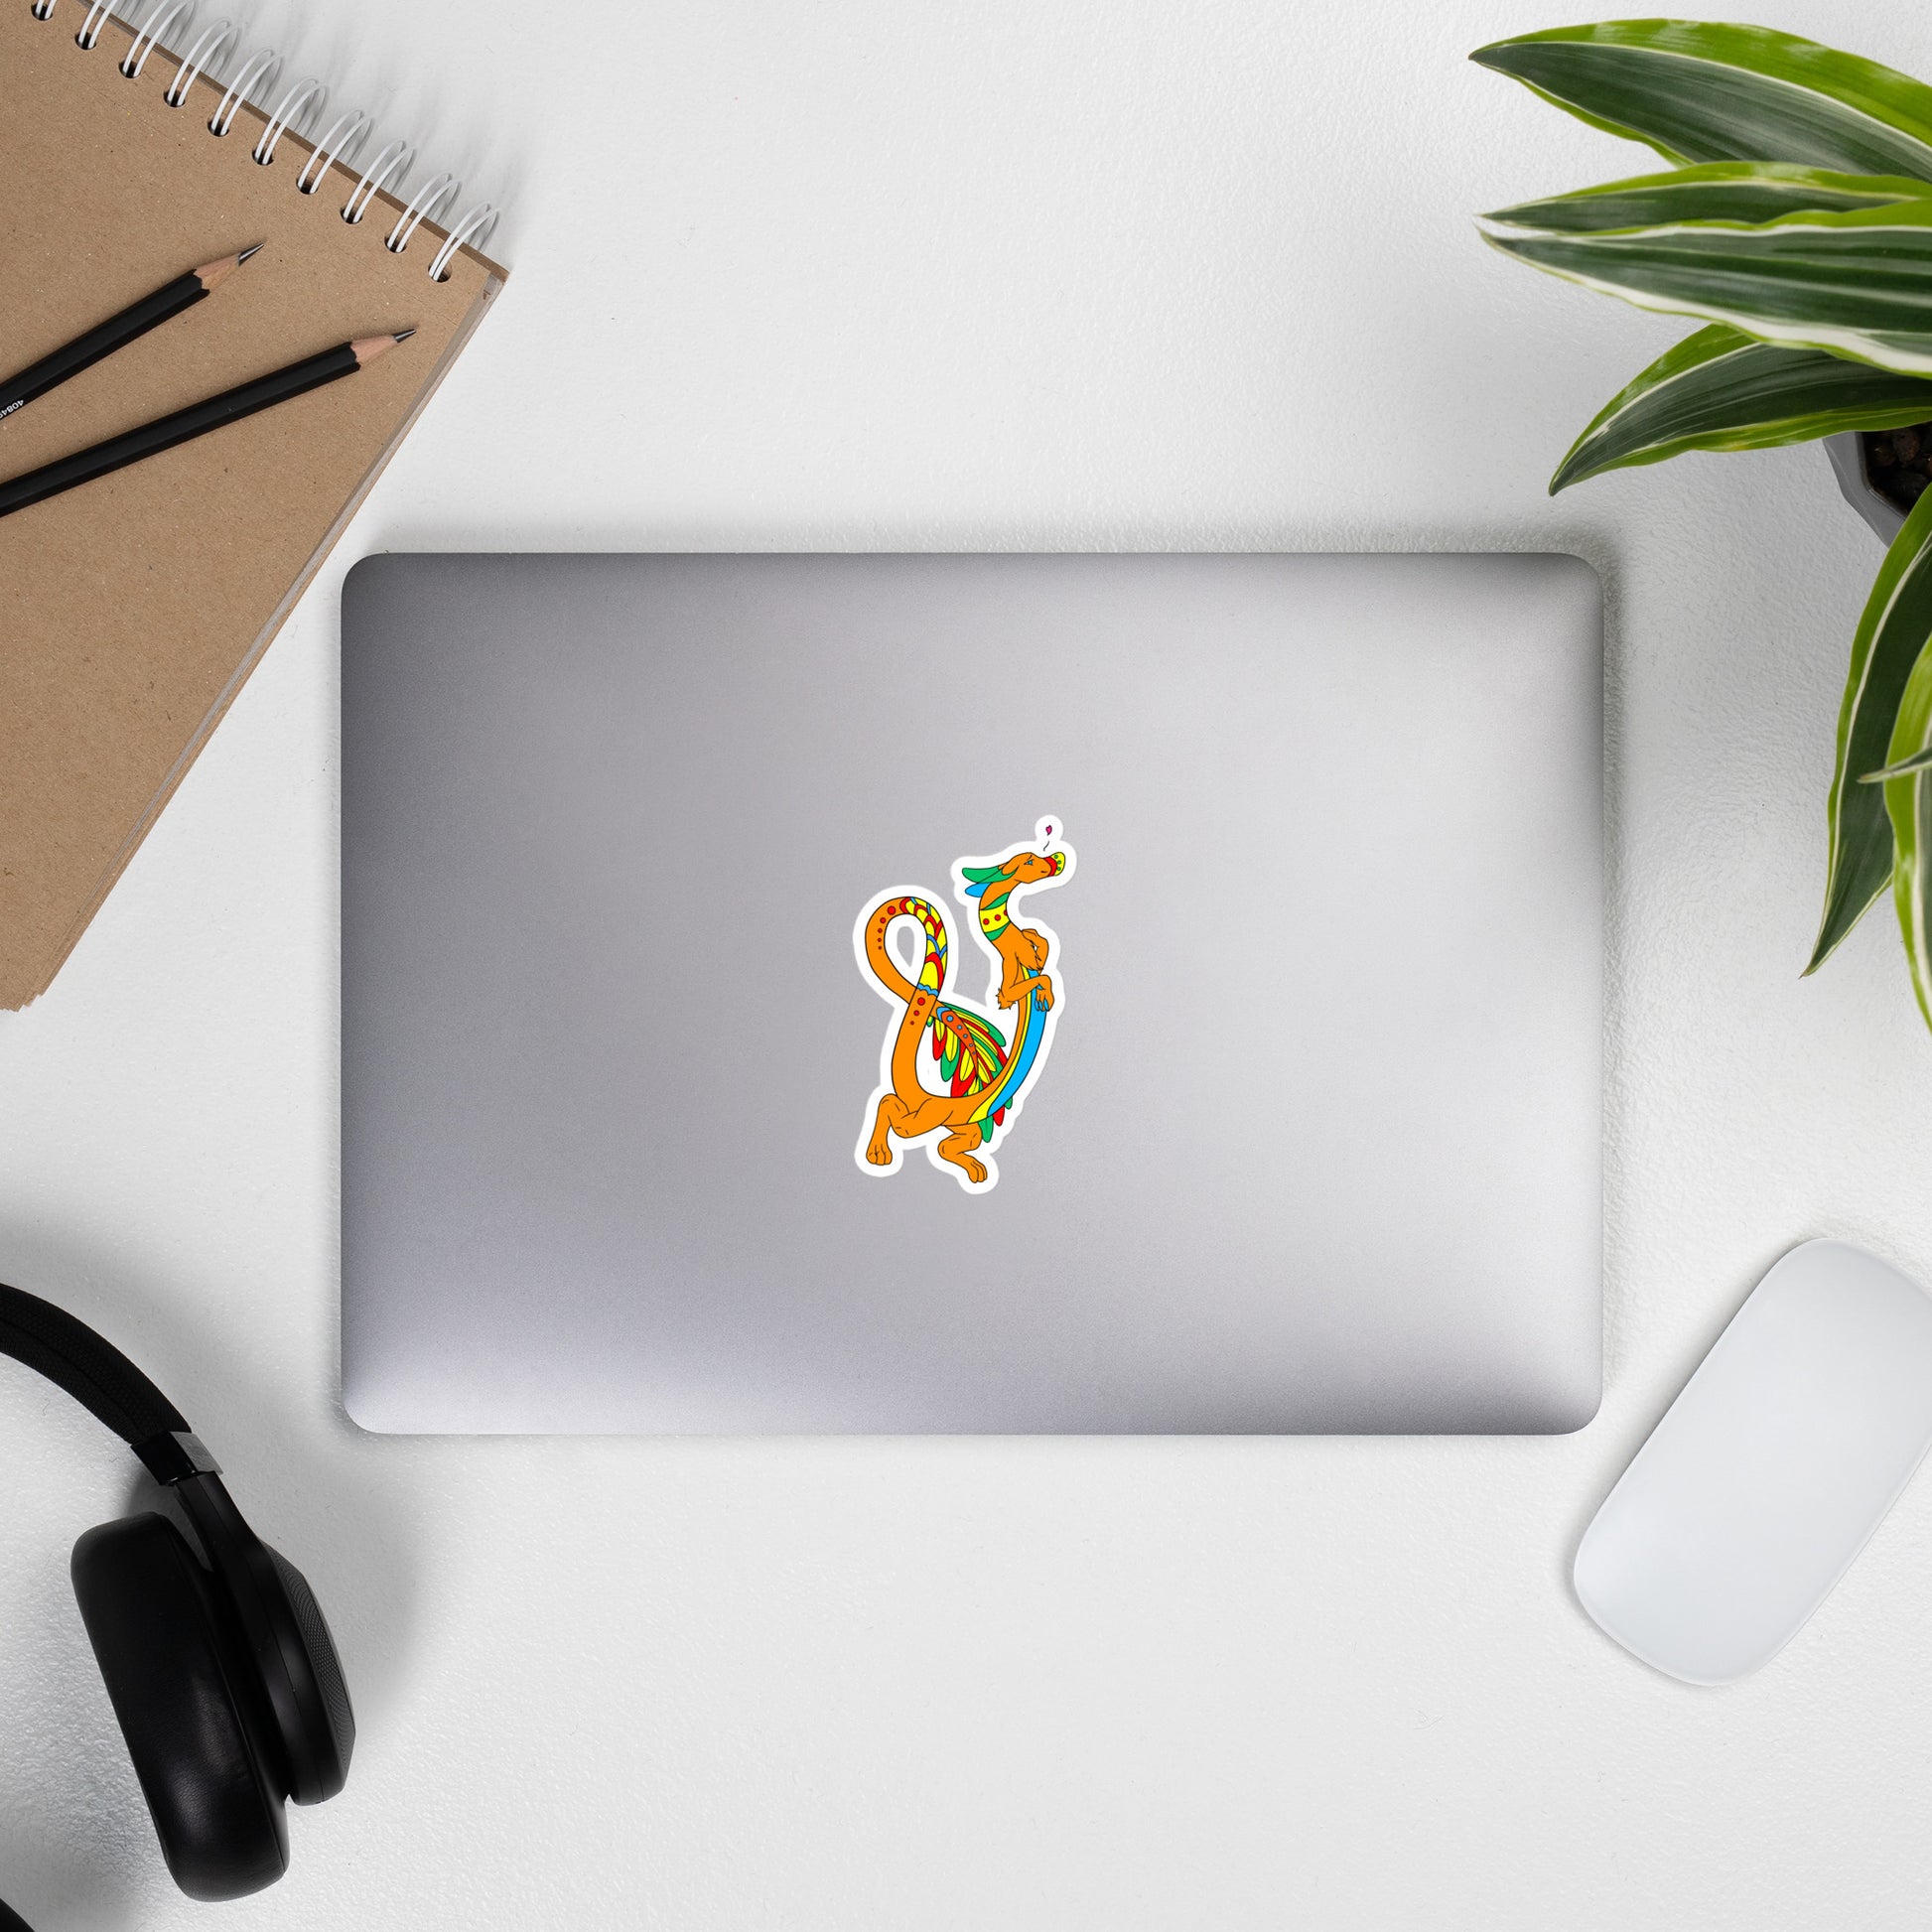 Domingo the Aztec Fuzzy Noodle Dragon. Original character design kiss-cut vinyl sticker with white border. 4 inches tall. Shown on a laptop.